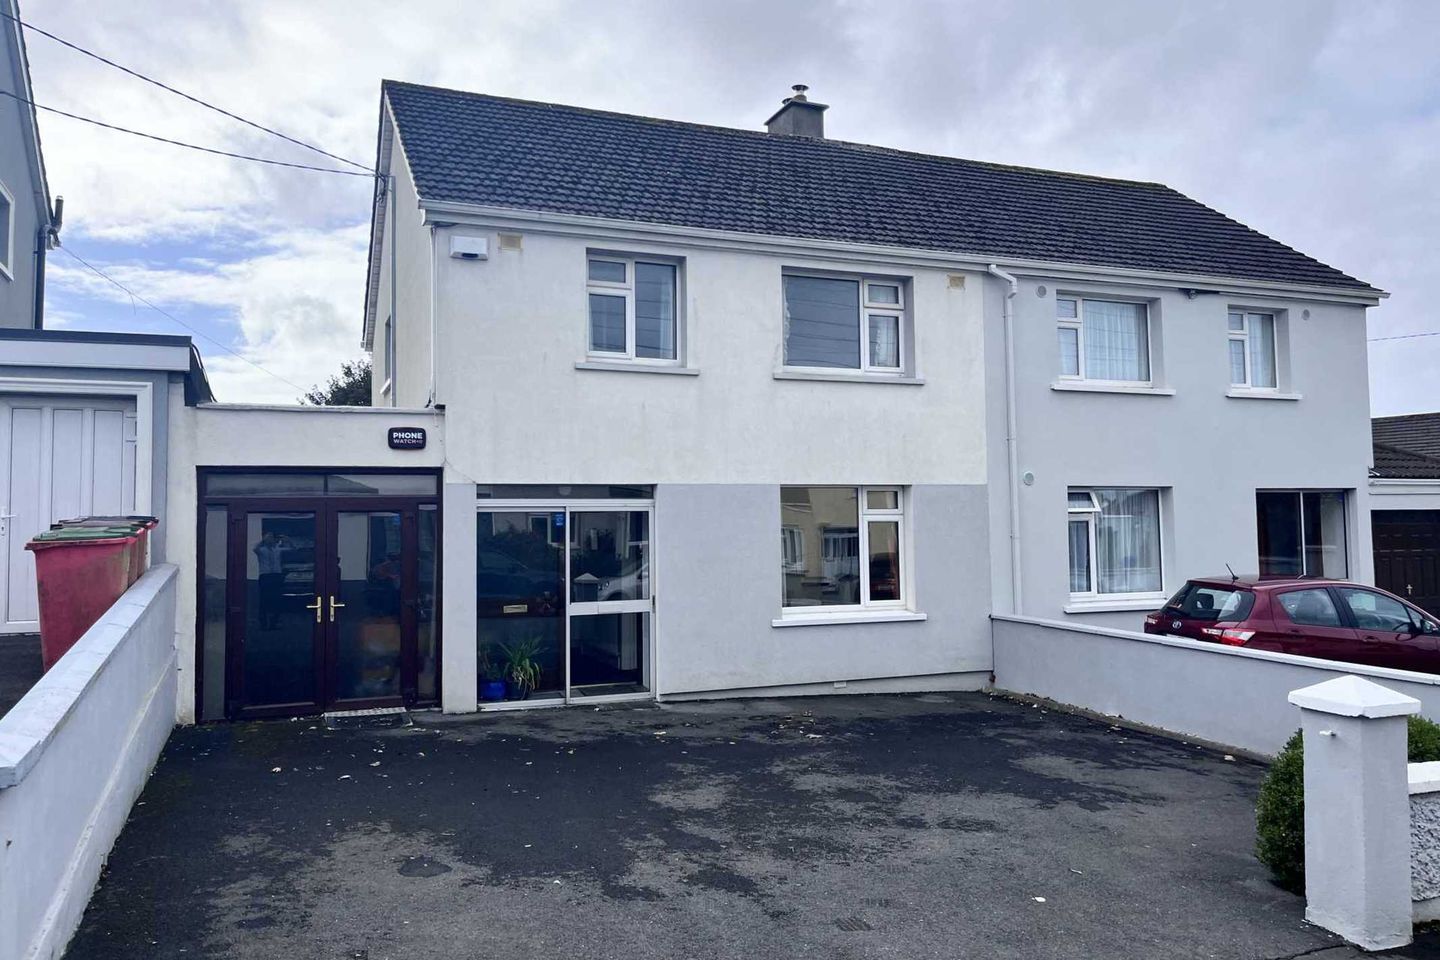 37 Renmore Park, Renmore, Co. Galway, H91XF9X